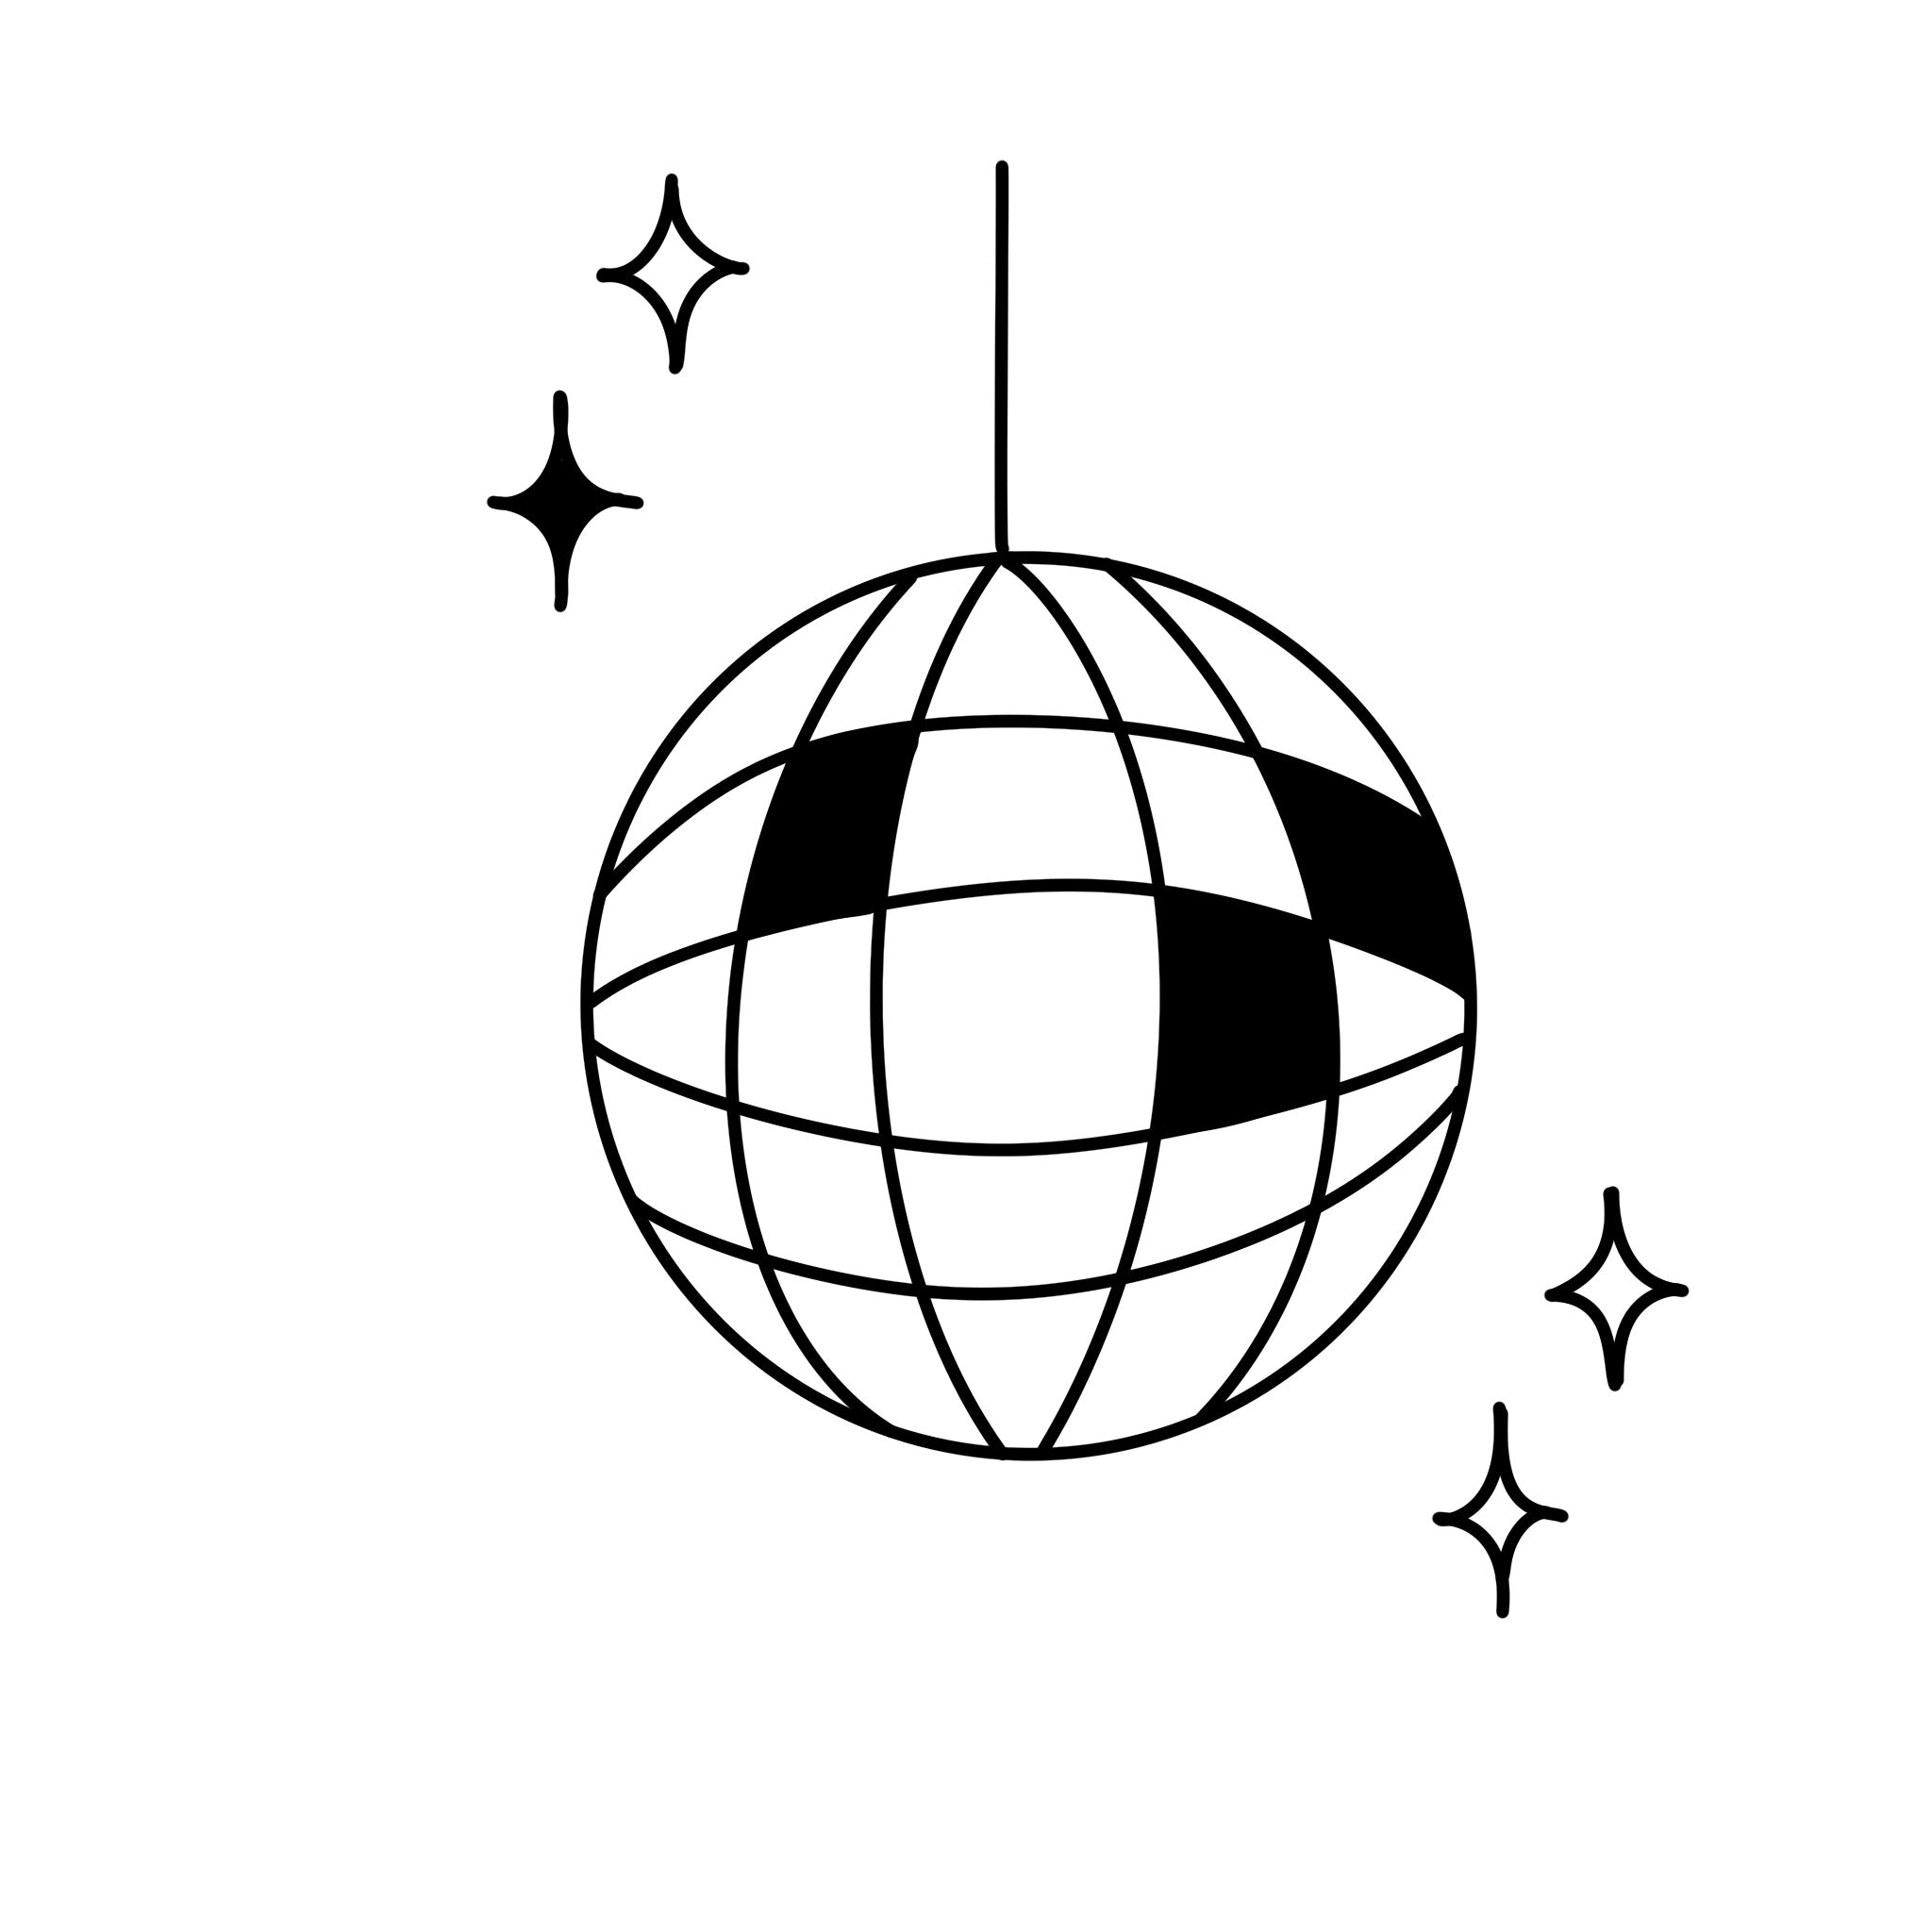 One line Disco ball tattoo on the inner forearm